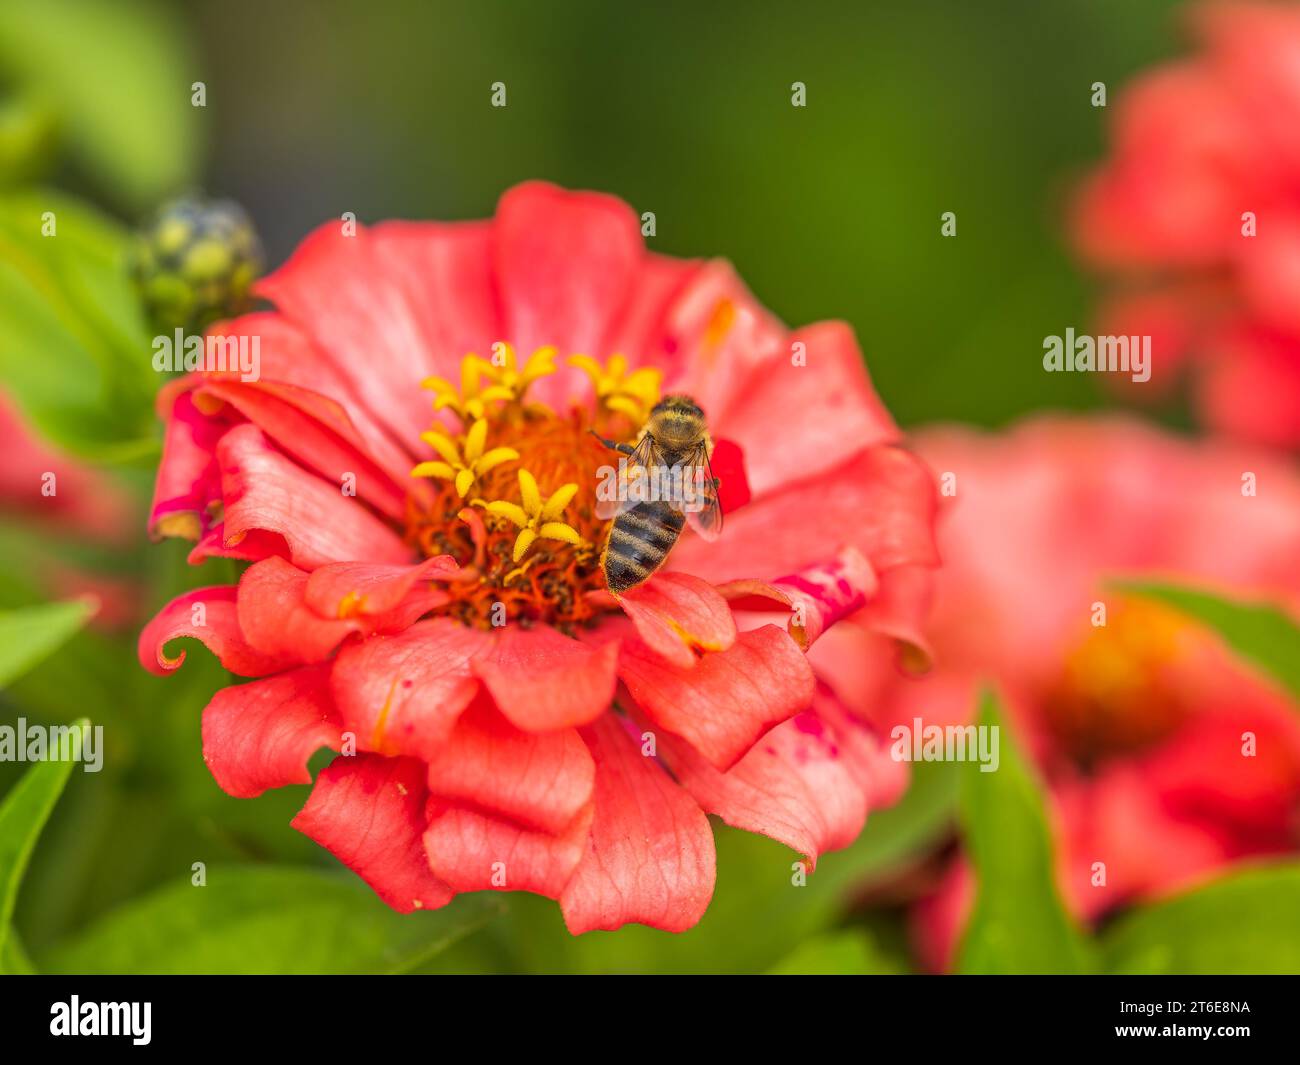 A bee collects nectar from Red marigolds flower in the garden in summer close-up. Blooming tagetes flower with red petals in summer, close-up photo. Stock Photo